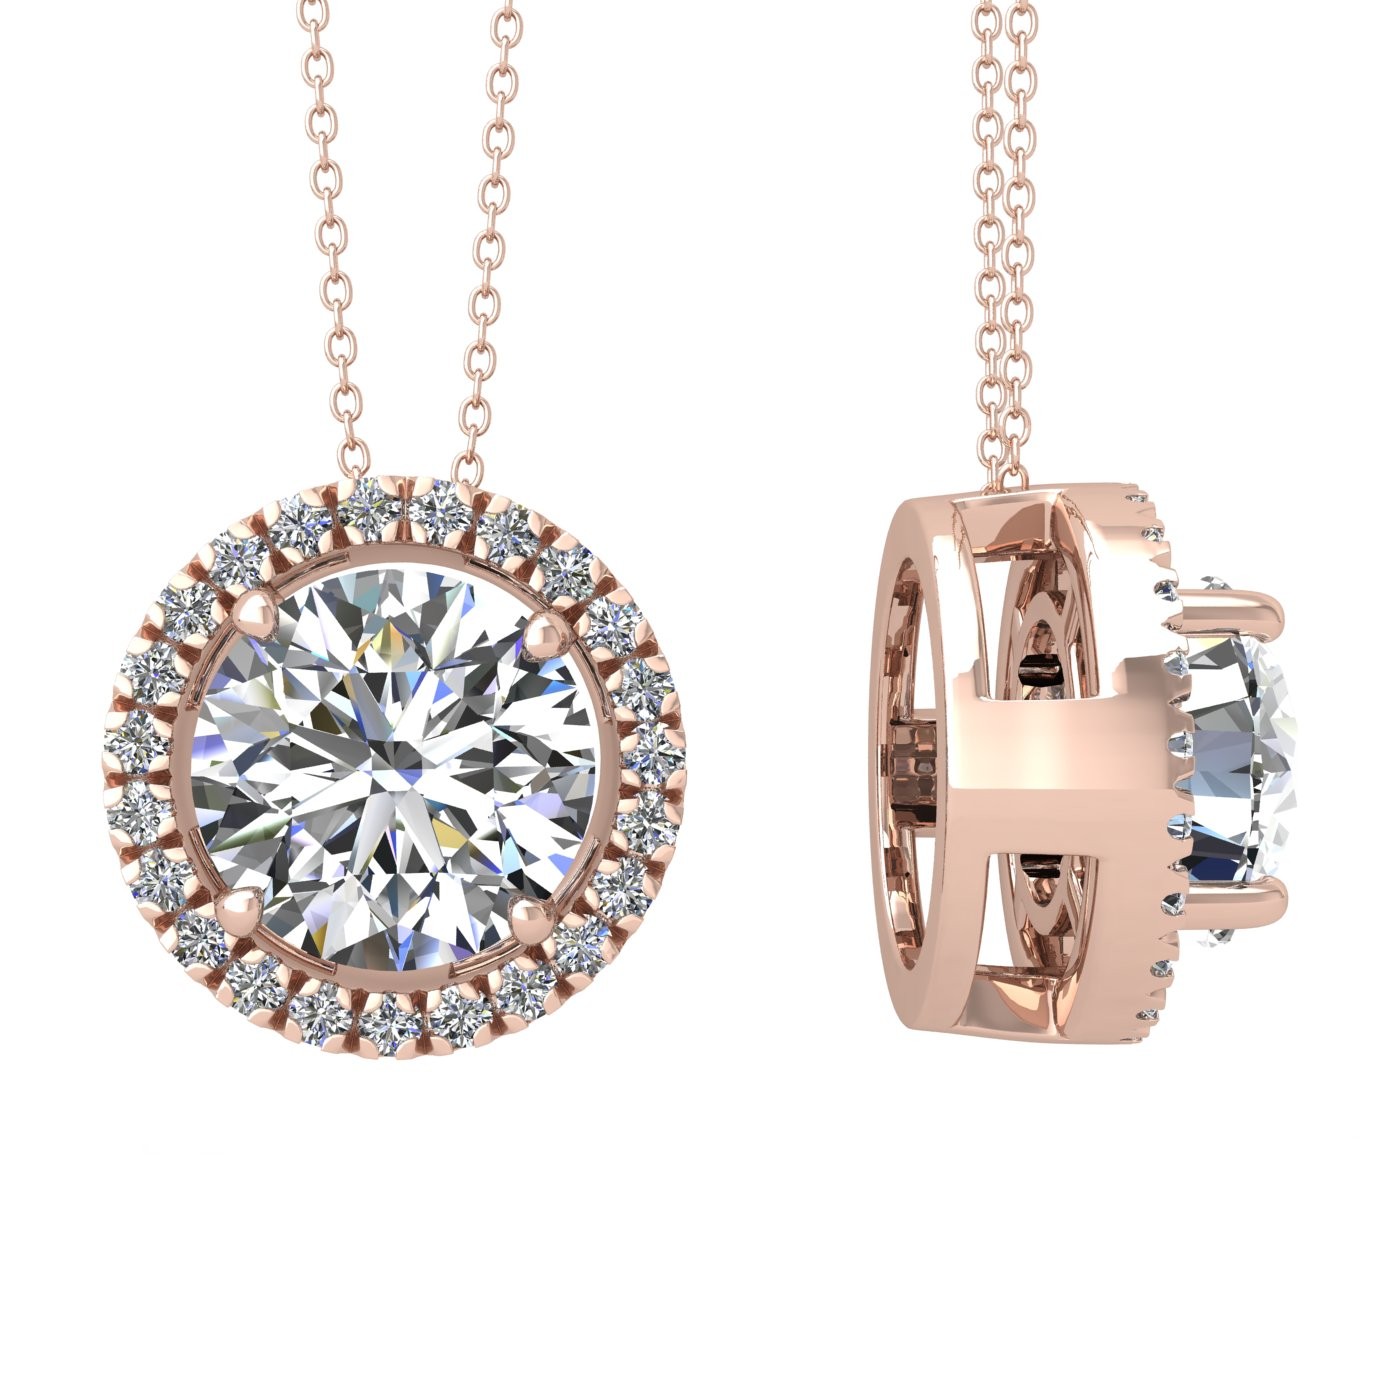 18k rose gold 1 ct 4 prong round shape diamond pendant with diamond pavÉ set halo including chain seperate from the pendant Photos & images